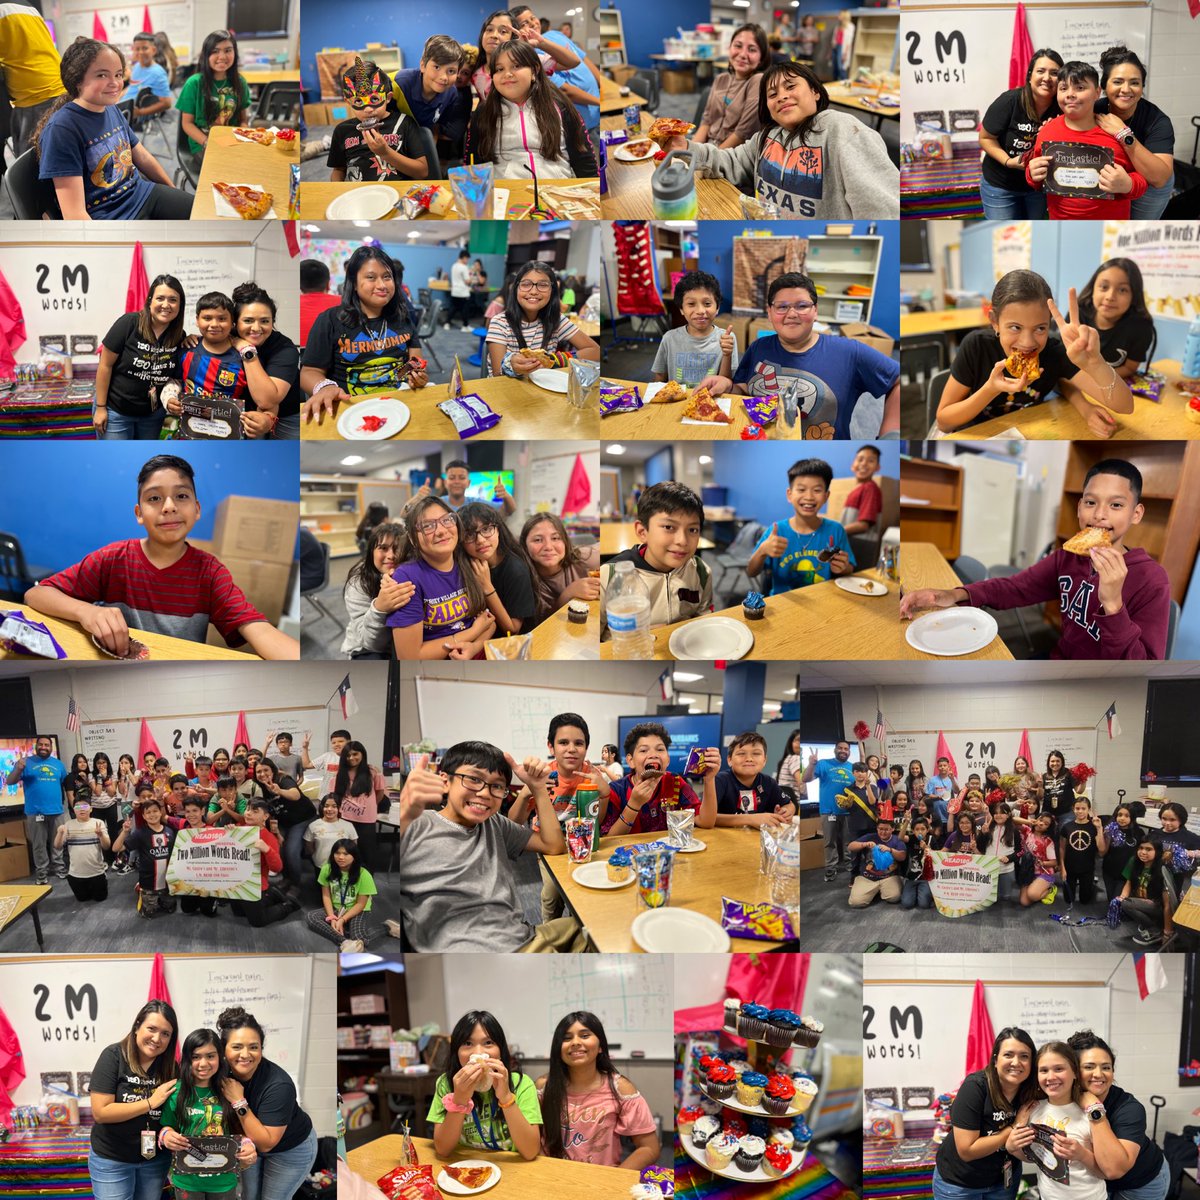 📚 These fifth graders amazed me this year! They exceeded their goals and read OVER 2 million words in each class! @ReedElementary @CFISDELs @VirginiaREADs @castro_teaches #CFISDspirit #ReedBuildsMinds